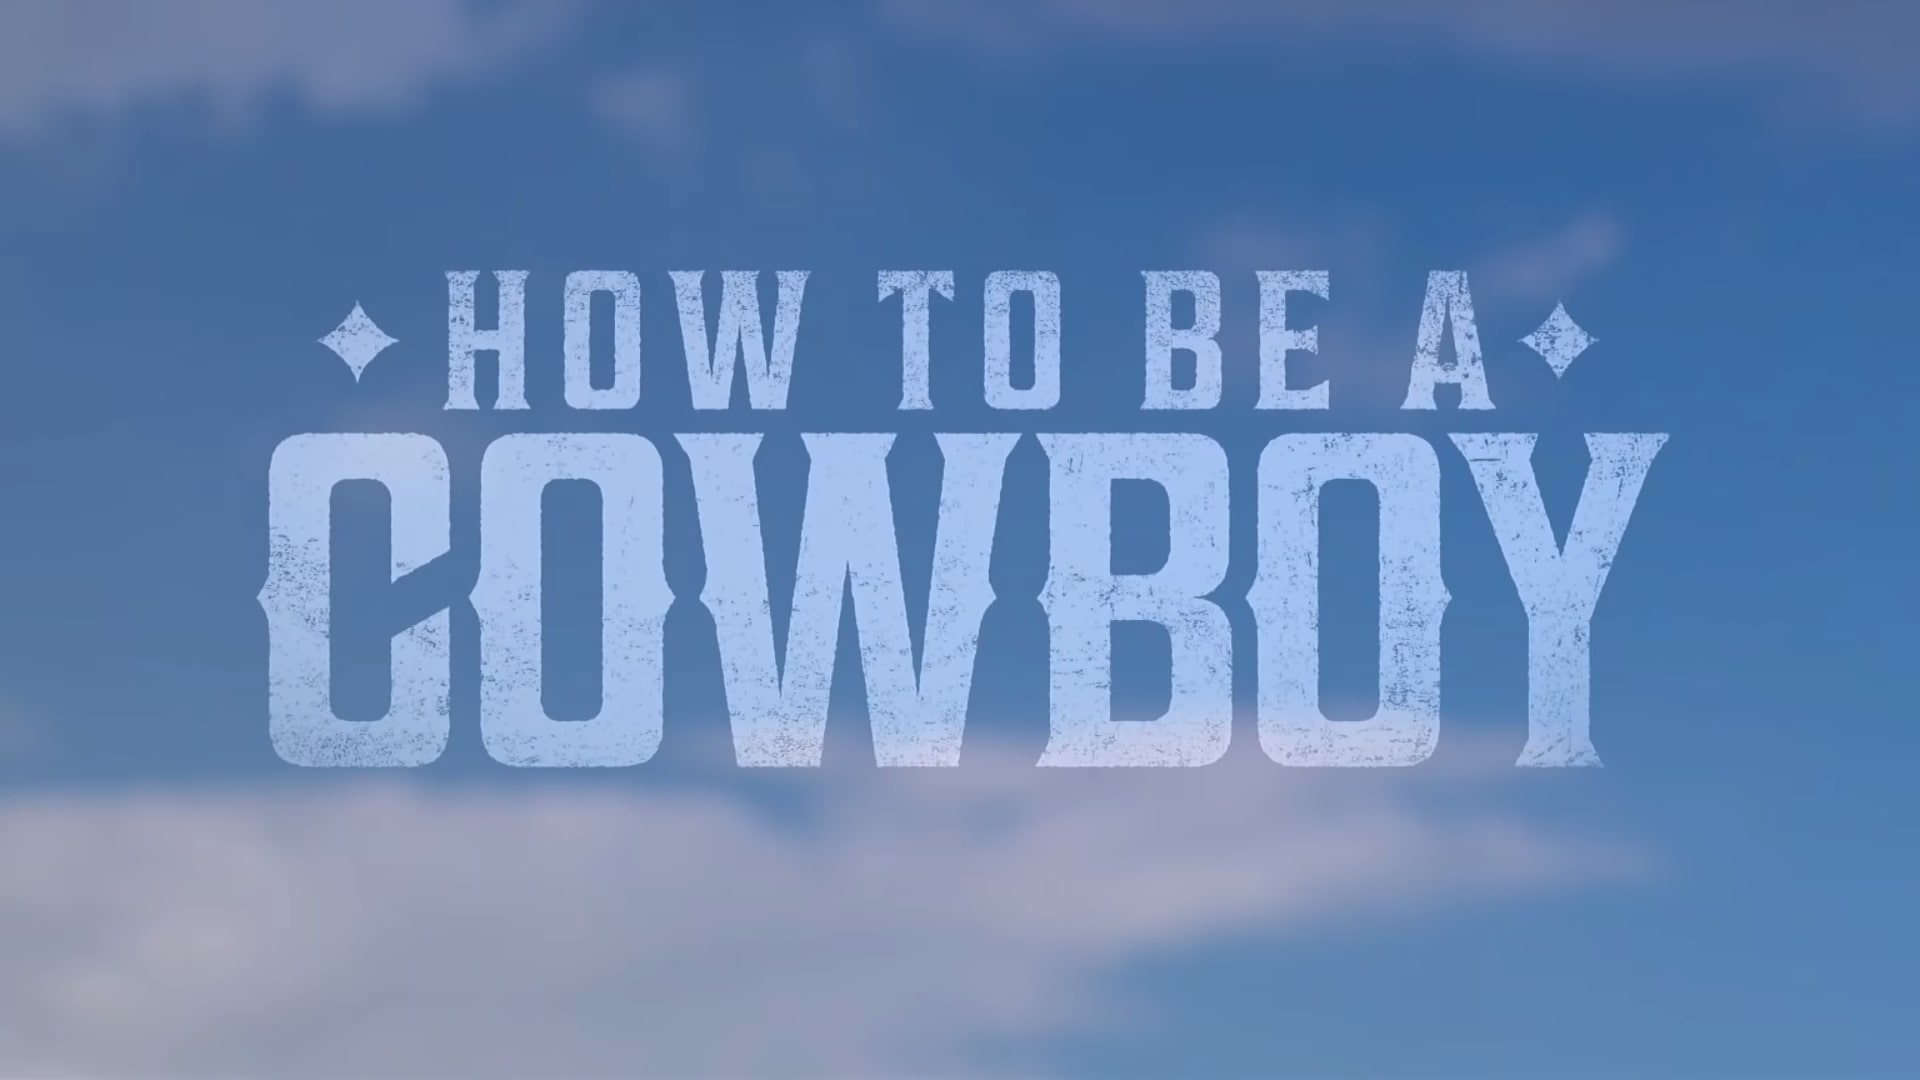 Netflix How to Be a Cowboy Season 1 Trailer, Coming to Netflix in September 2021